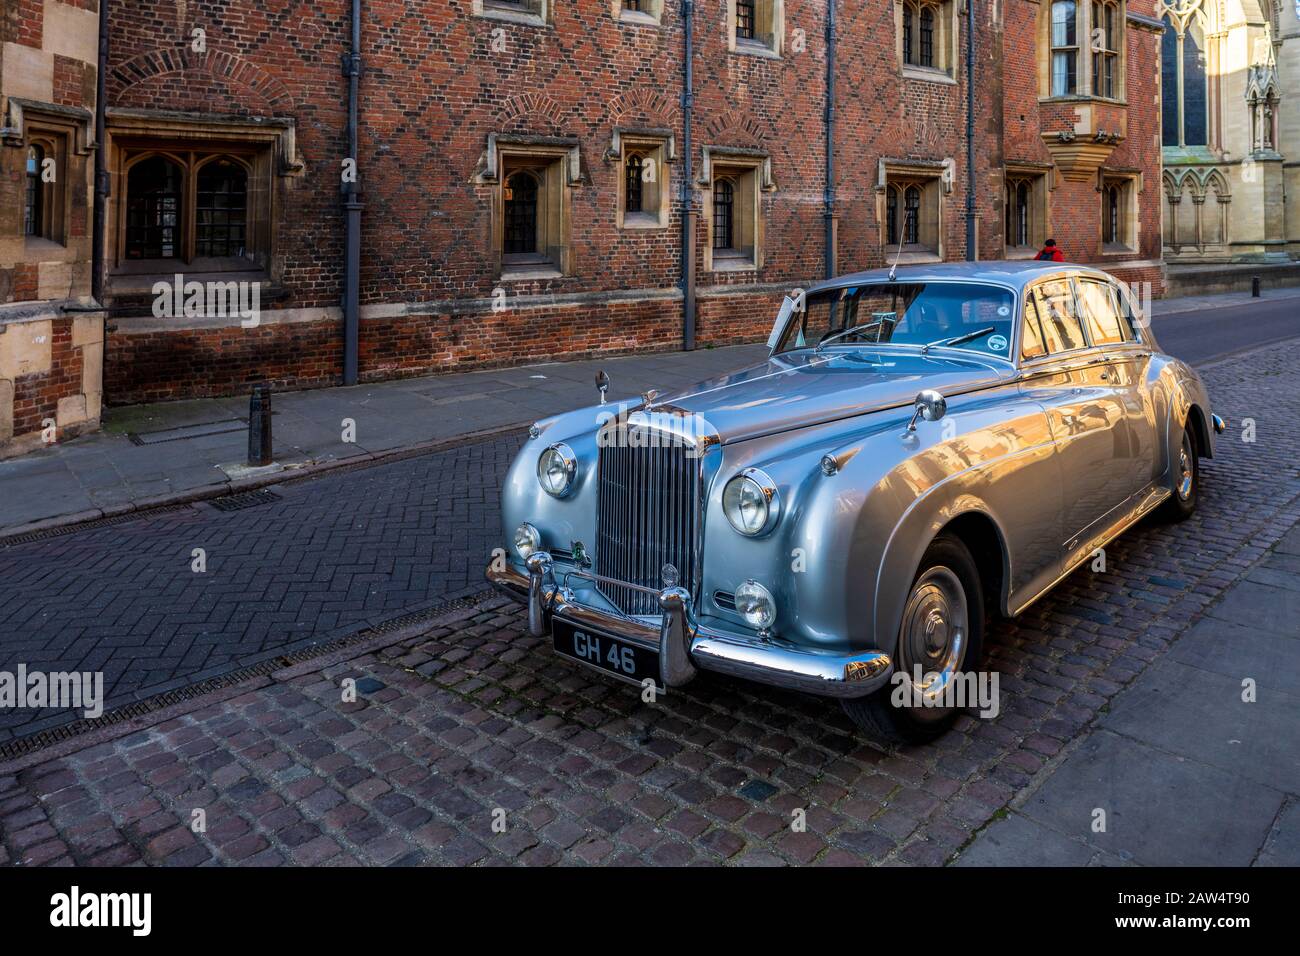 Vintage Bentley S1 in Central Cambridge near St John's College. The Bentley belongs to the Gonville Hotel. Stock Photo